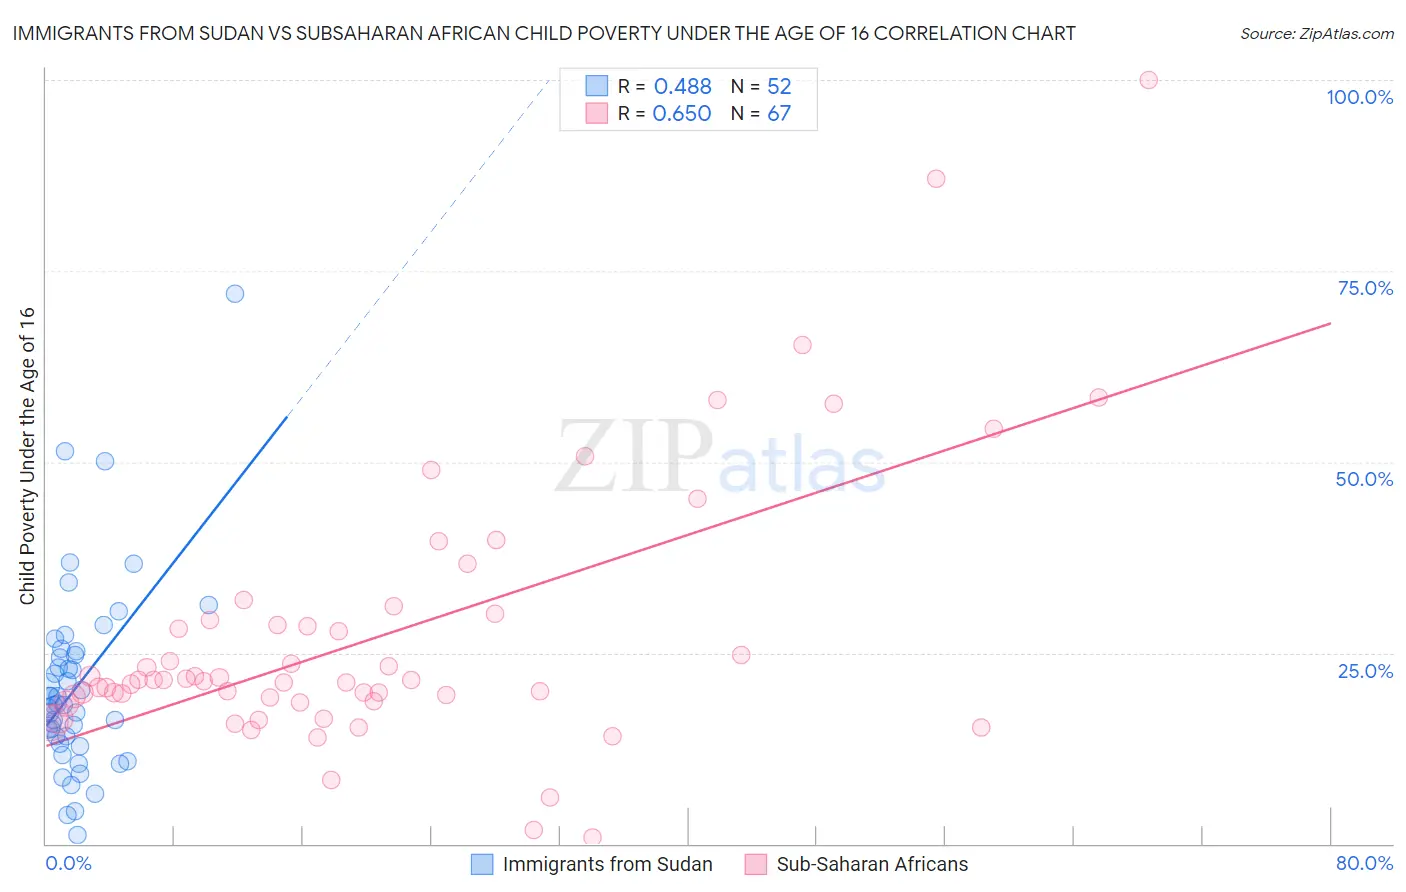 Immigrants from Sudan vs Subsaharan African Child Poverty Under the Age of 16